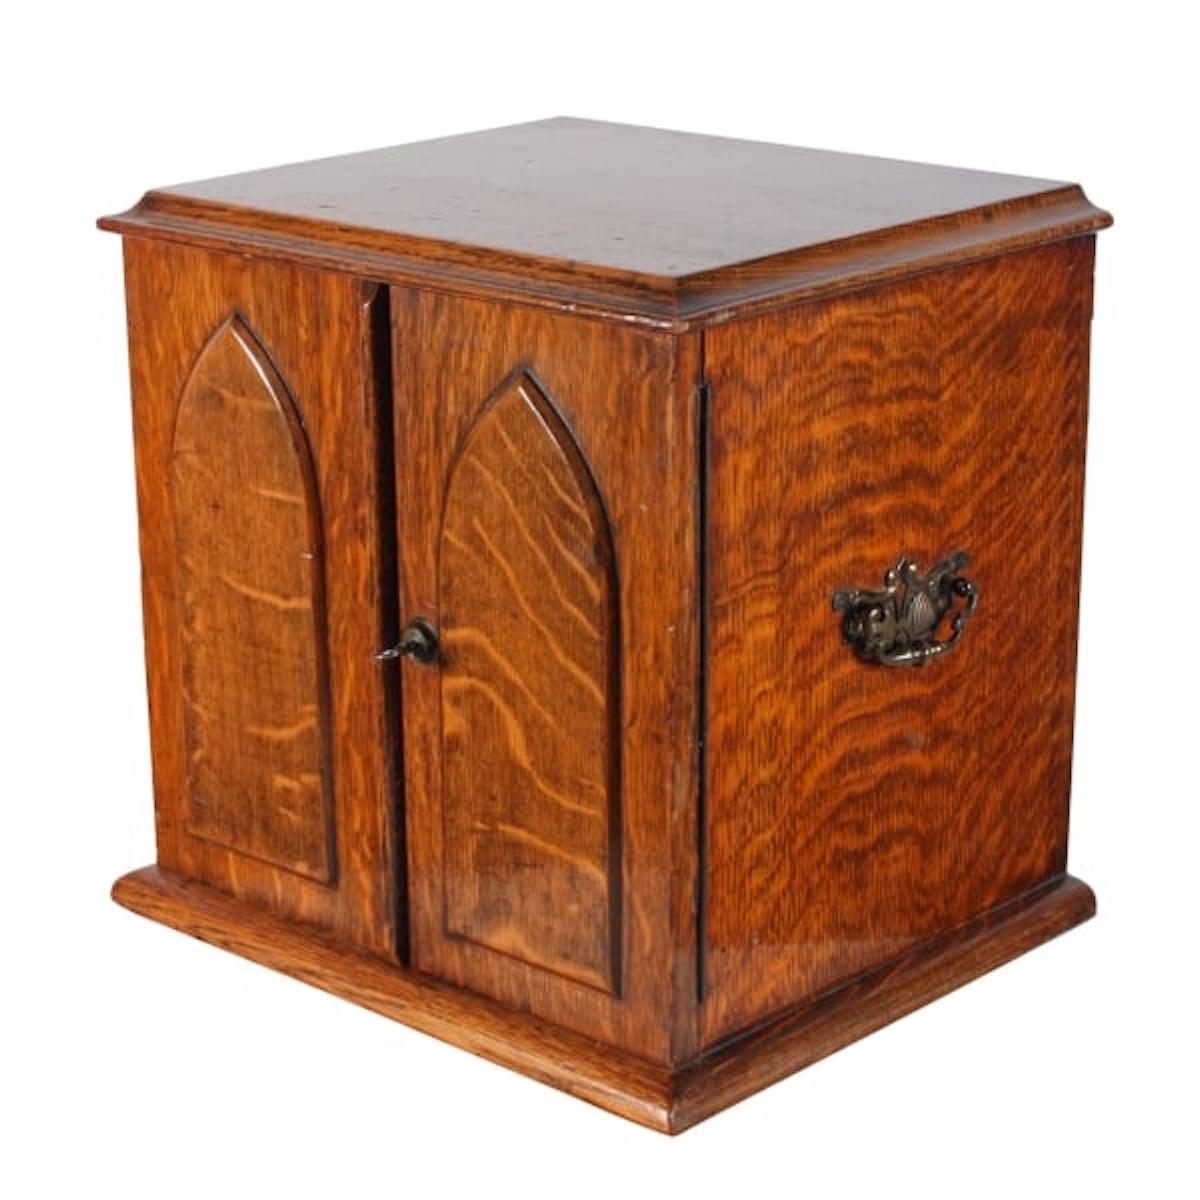 Victorian oak collector's cabinet.

A late 19th century Victorian oak two door collector's cabinet.

The cabinet doors are decorated with a pair of raised Gothic arch panels and has a pair of brass carrying handles.

The cabinet has four